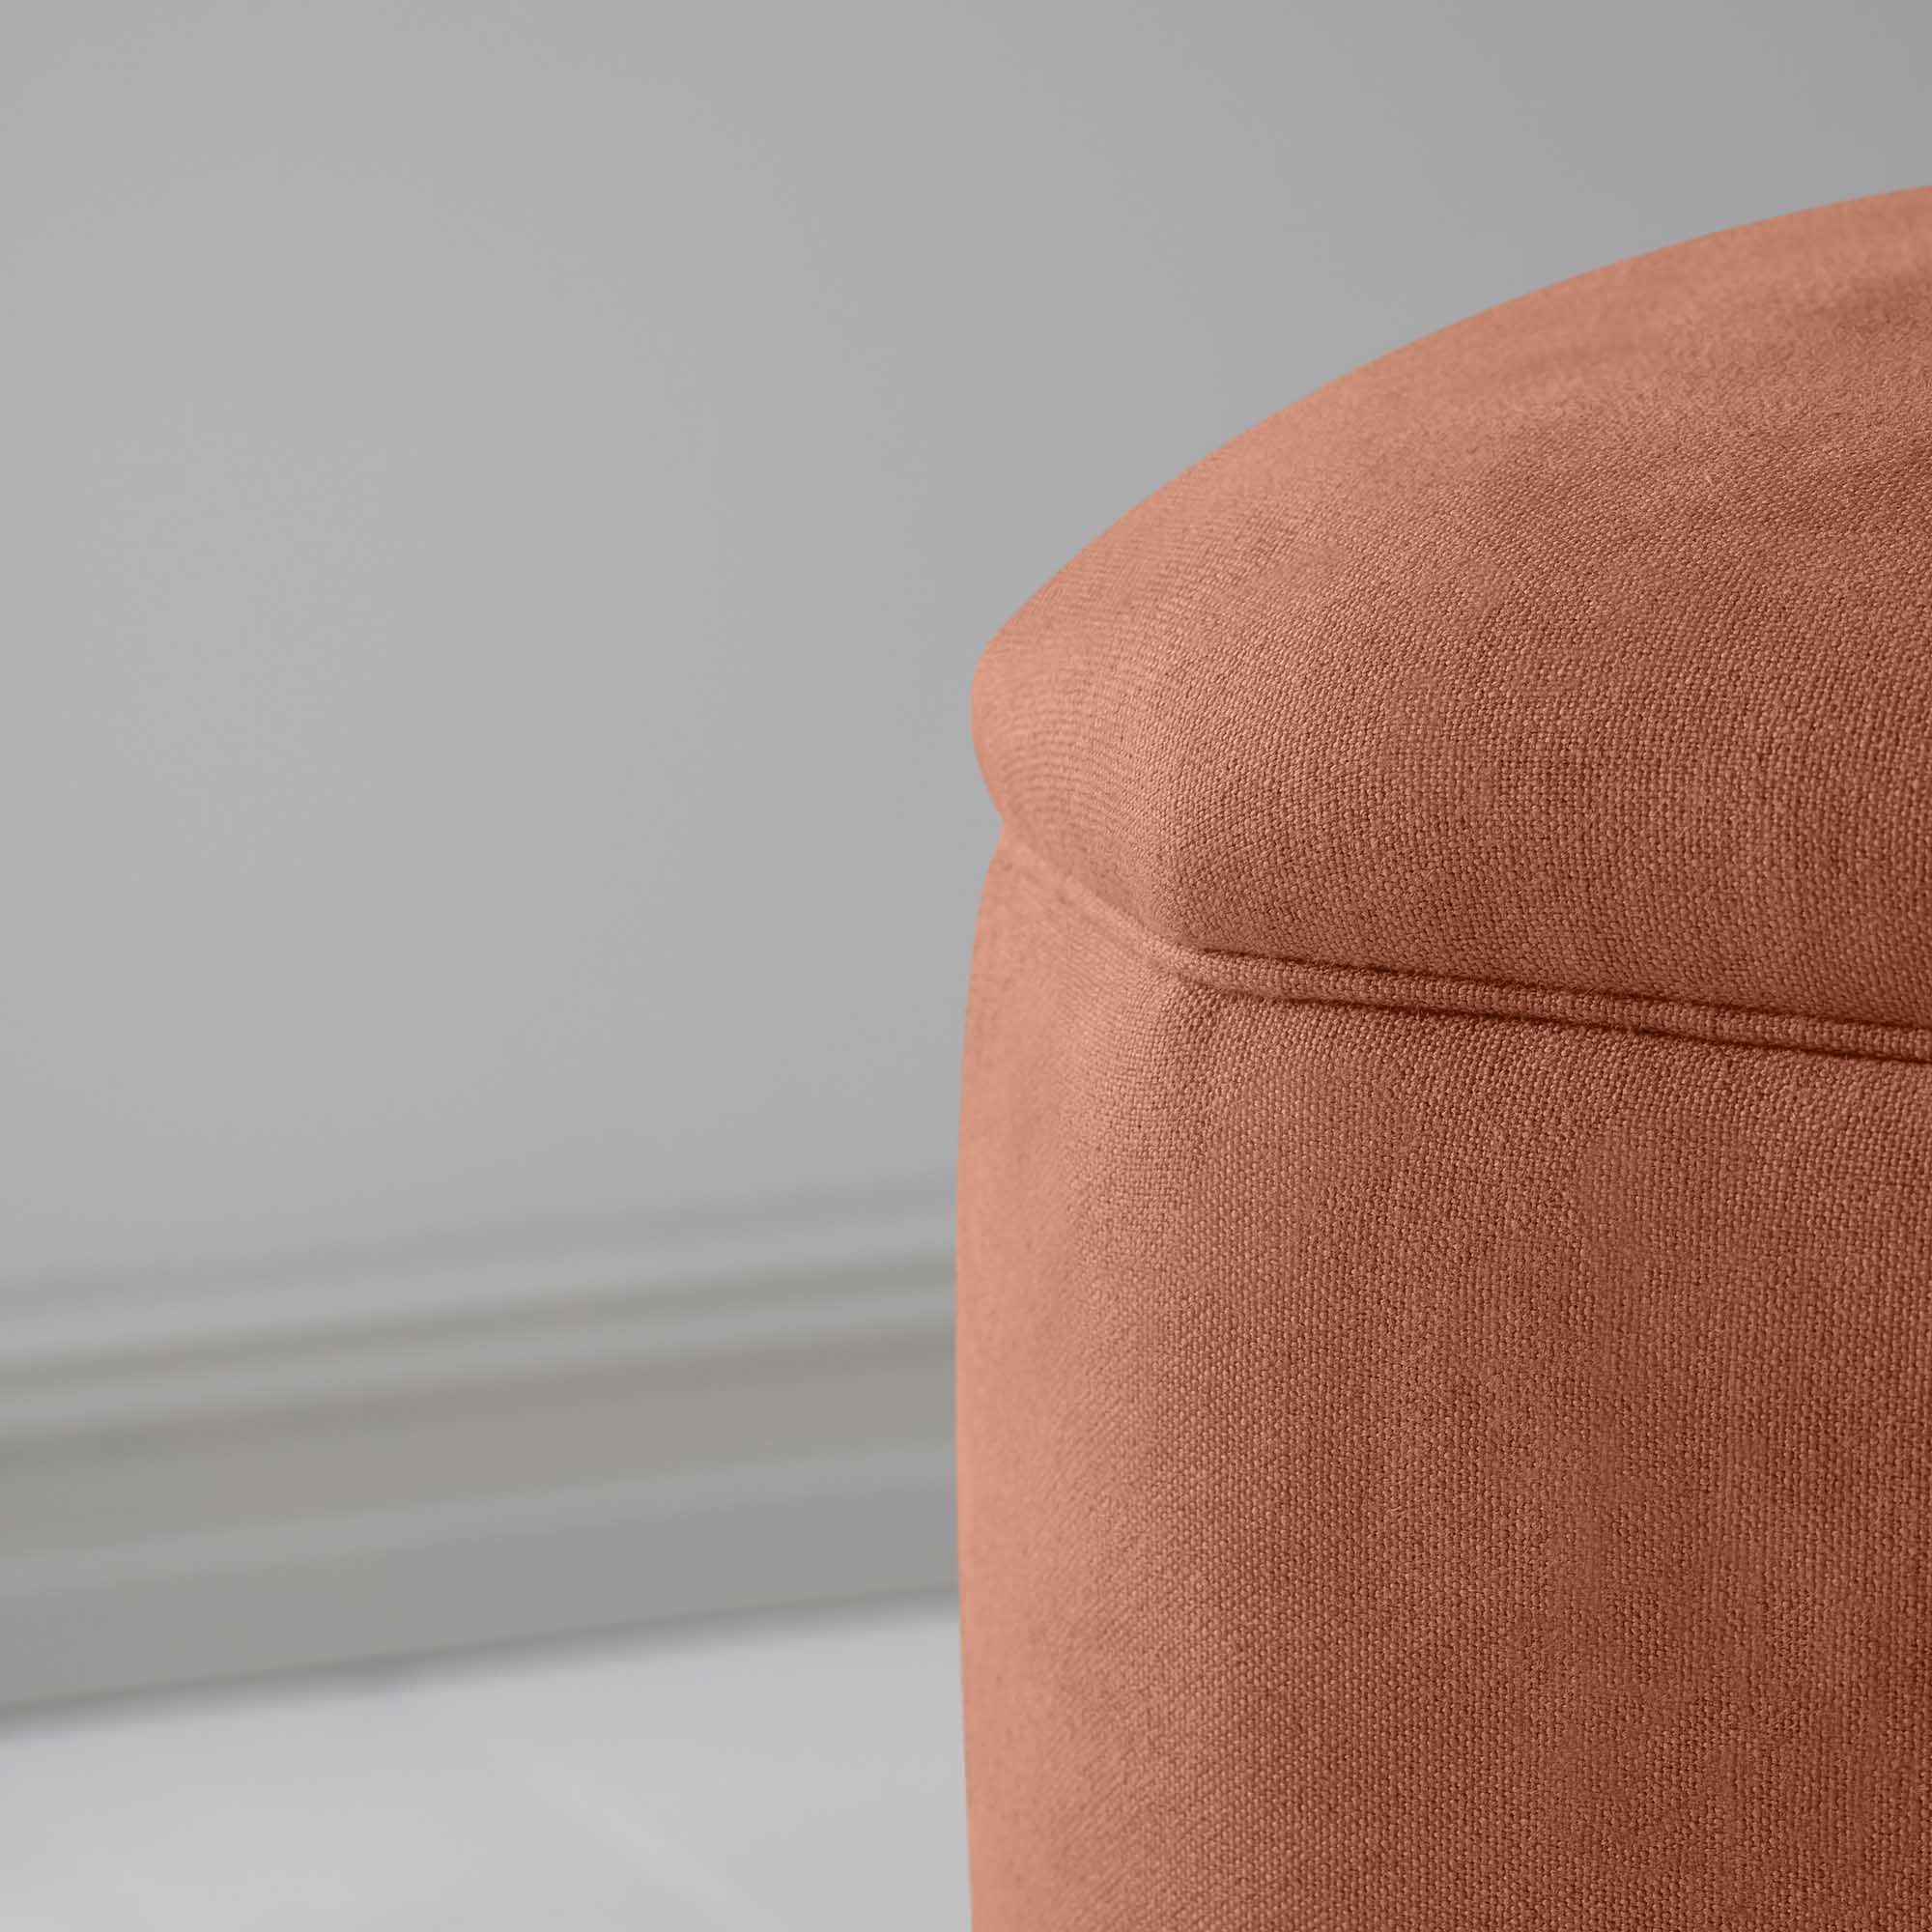  Thither Hexagonal Ottoman in Laidback Linen Cayenne 